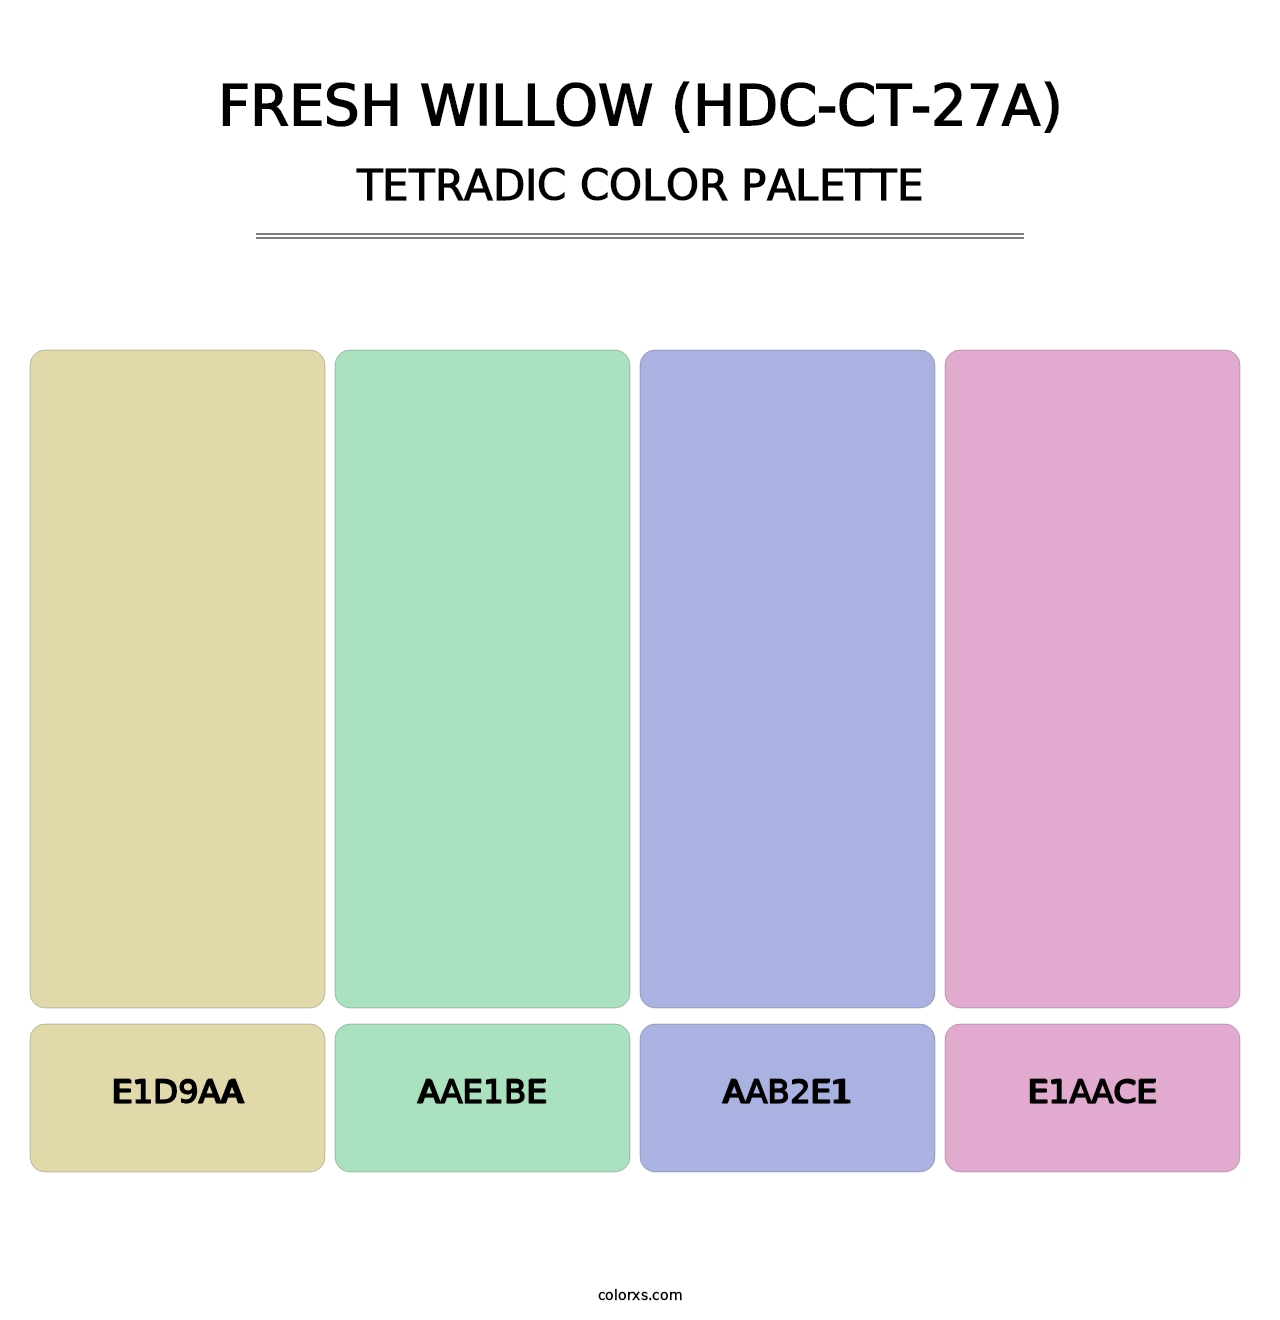 Fresh Willow (HDC-CT-27A) - Tetradic Color Palette